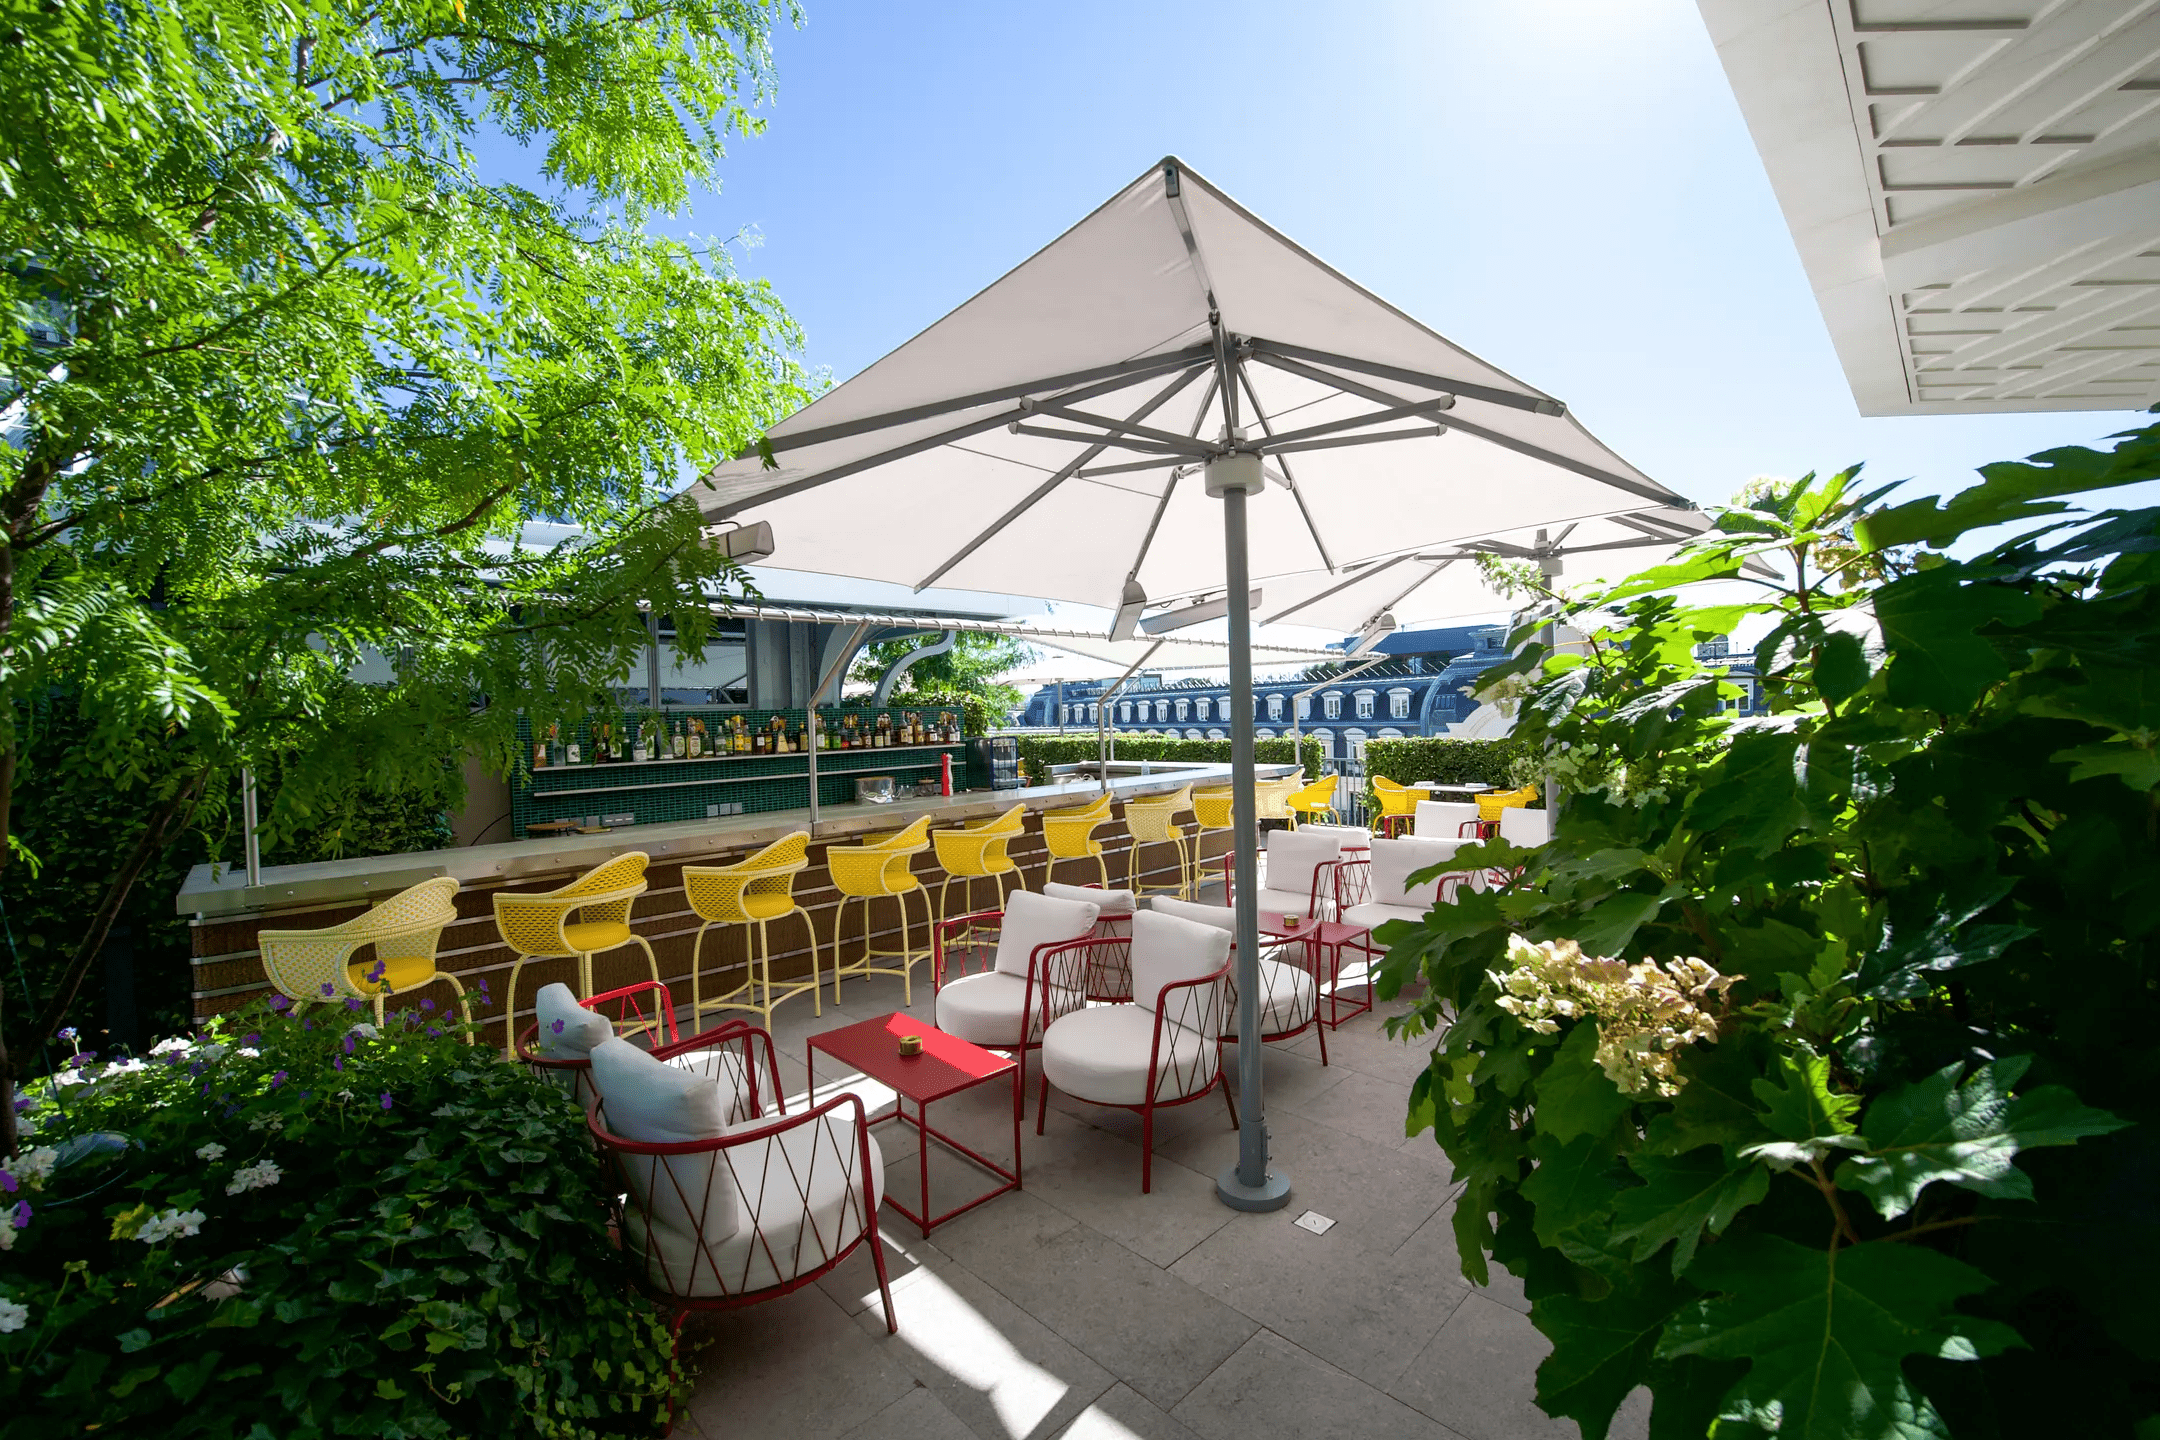 MAY Schattello Parasol shading a Rooftop Bar in London on a sunny day